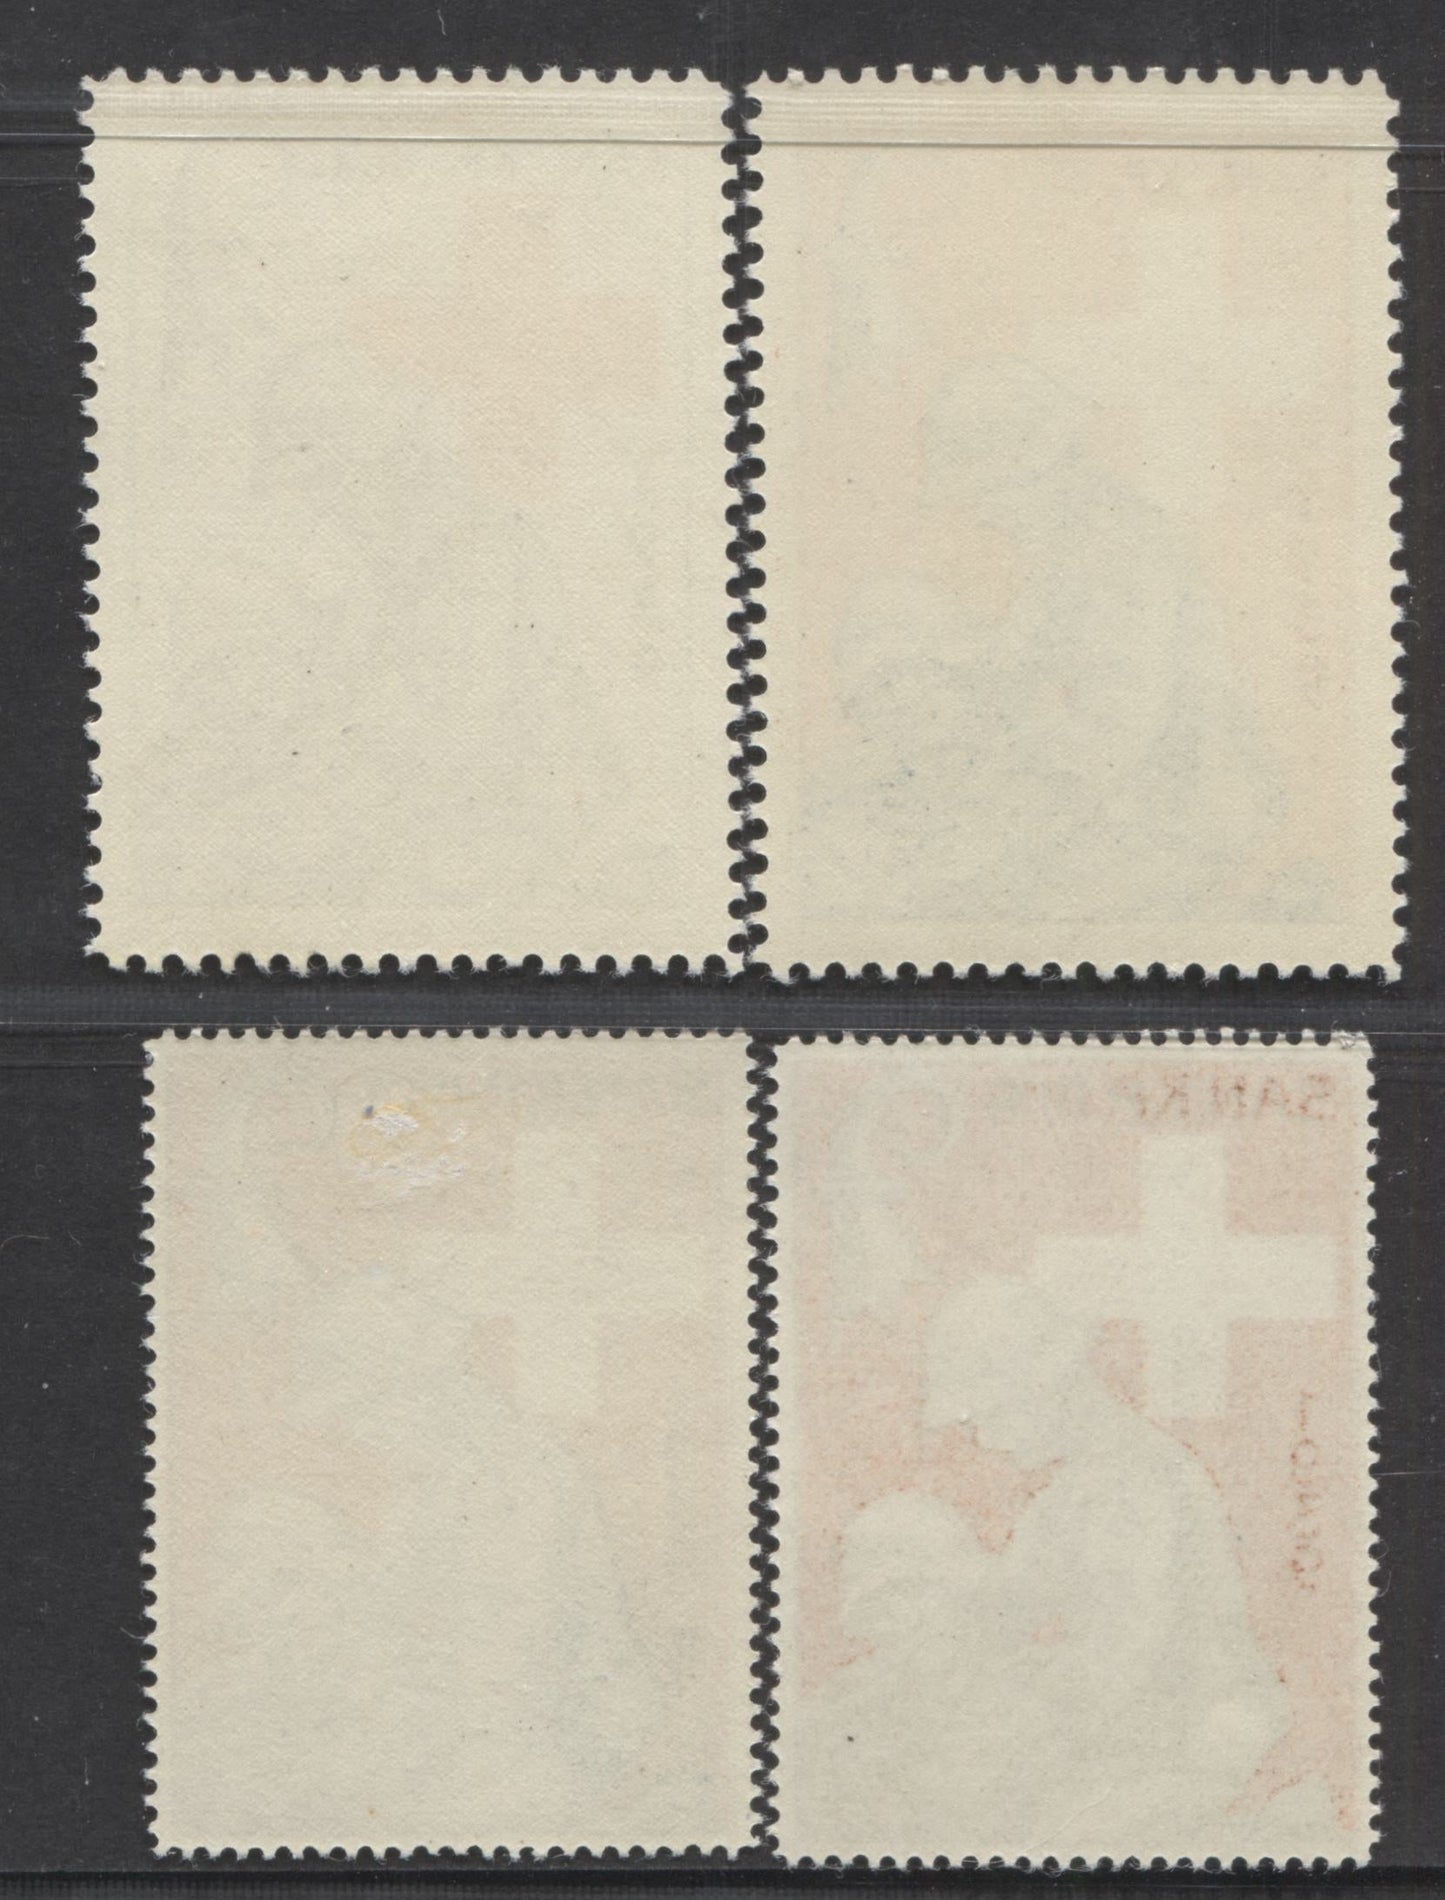 Lot 85 Switzerland SC#Unlisted  1939 Military Stamp Issue - SAN. KP. III/4 Division, Thin And Thick Lettering. Perf, 4 VFNH and VFOG Examples, Click on Listing to See ALL Pictures, Estimated Value $10 USD